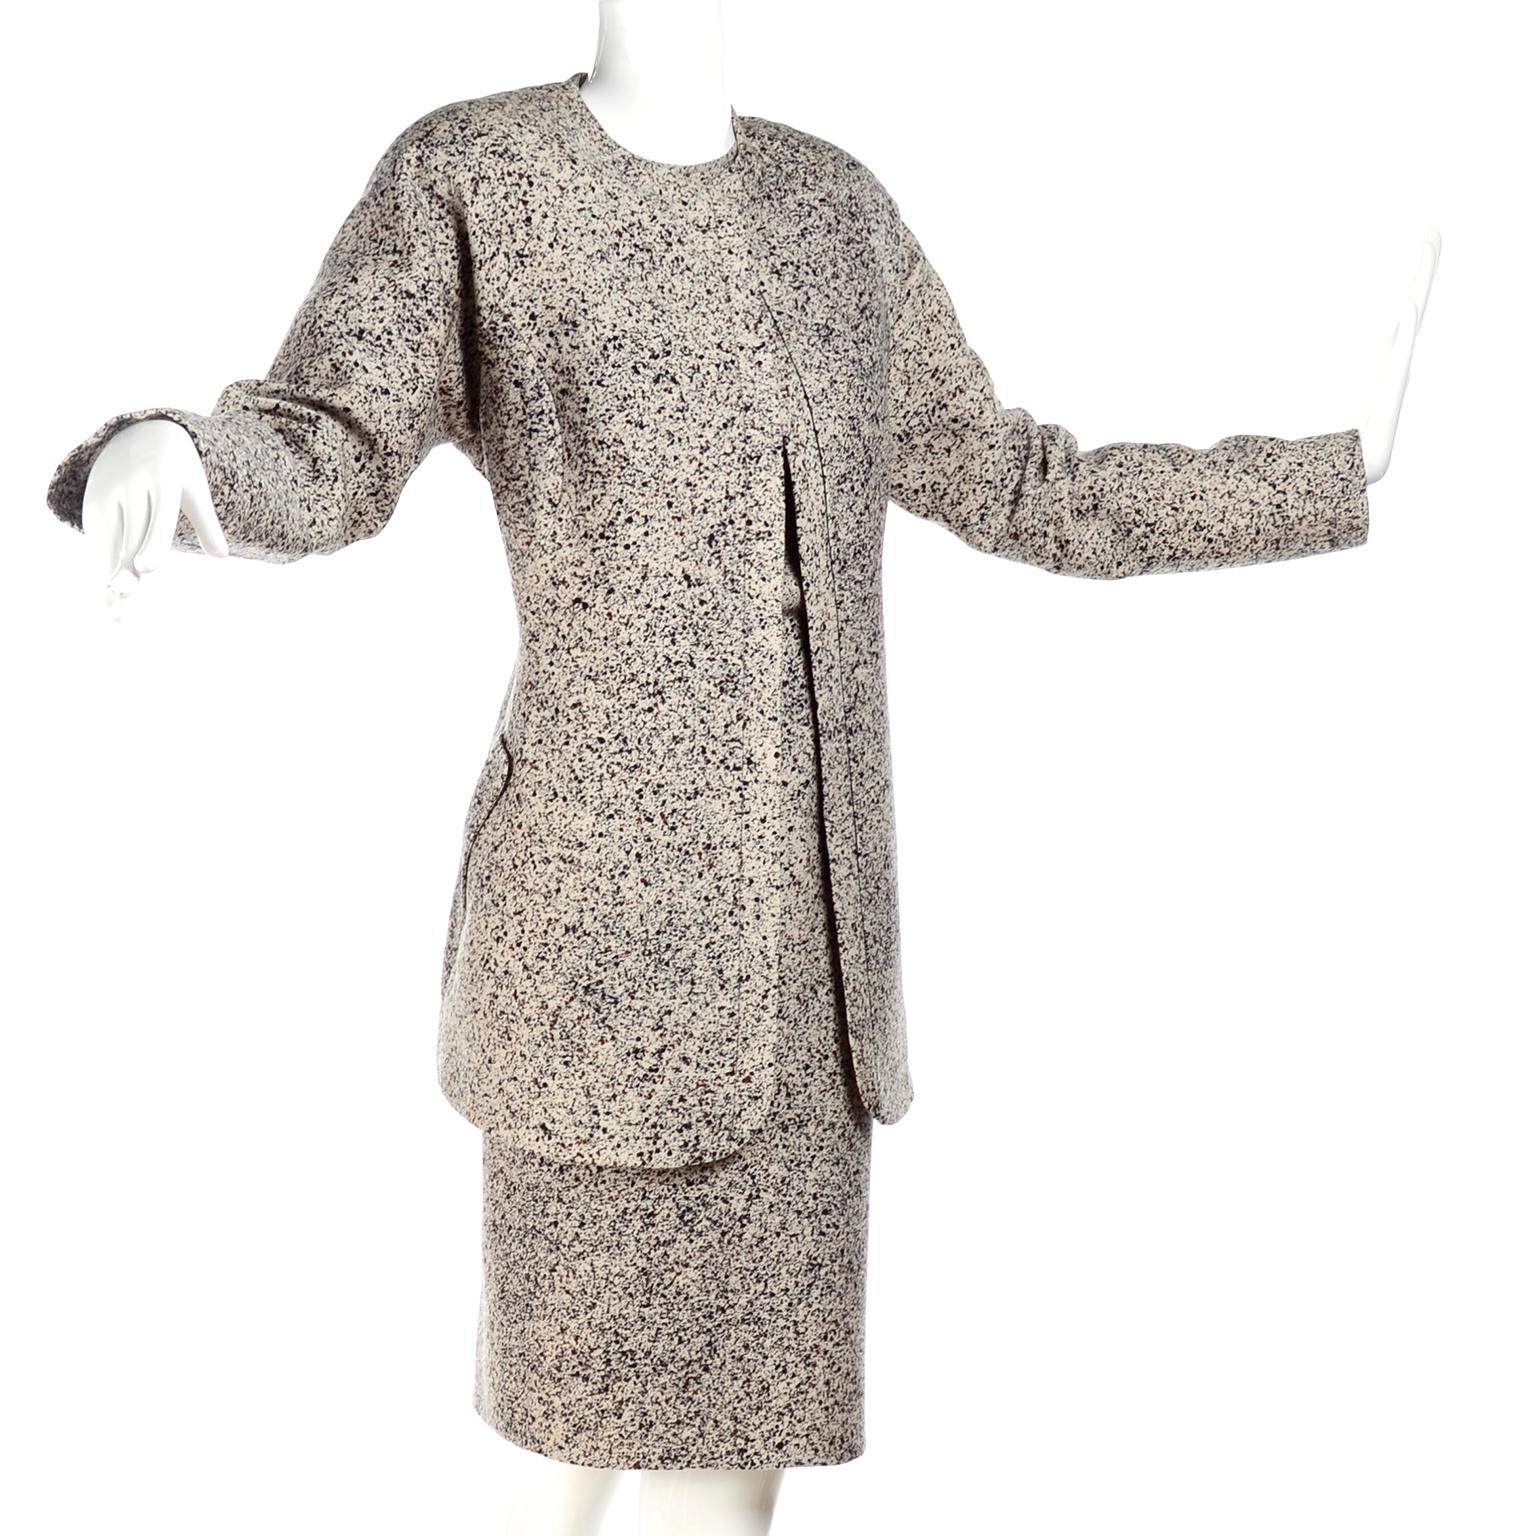 1990s Geoffrey Beene 3 Pc Outfit With Skirt Jacket & Top Suit in Speckled Knit For Sale 3